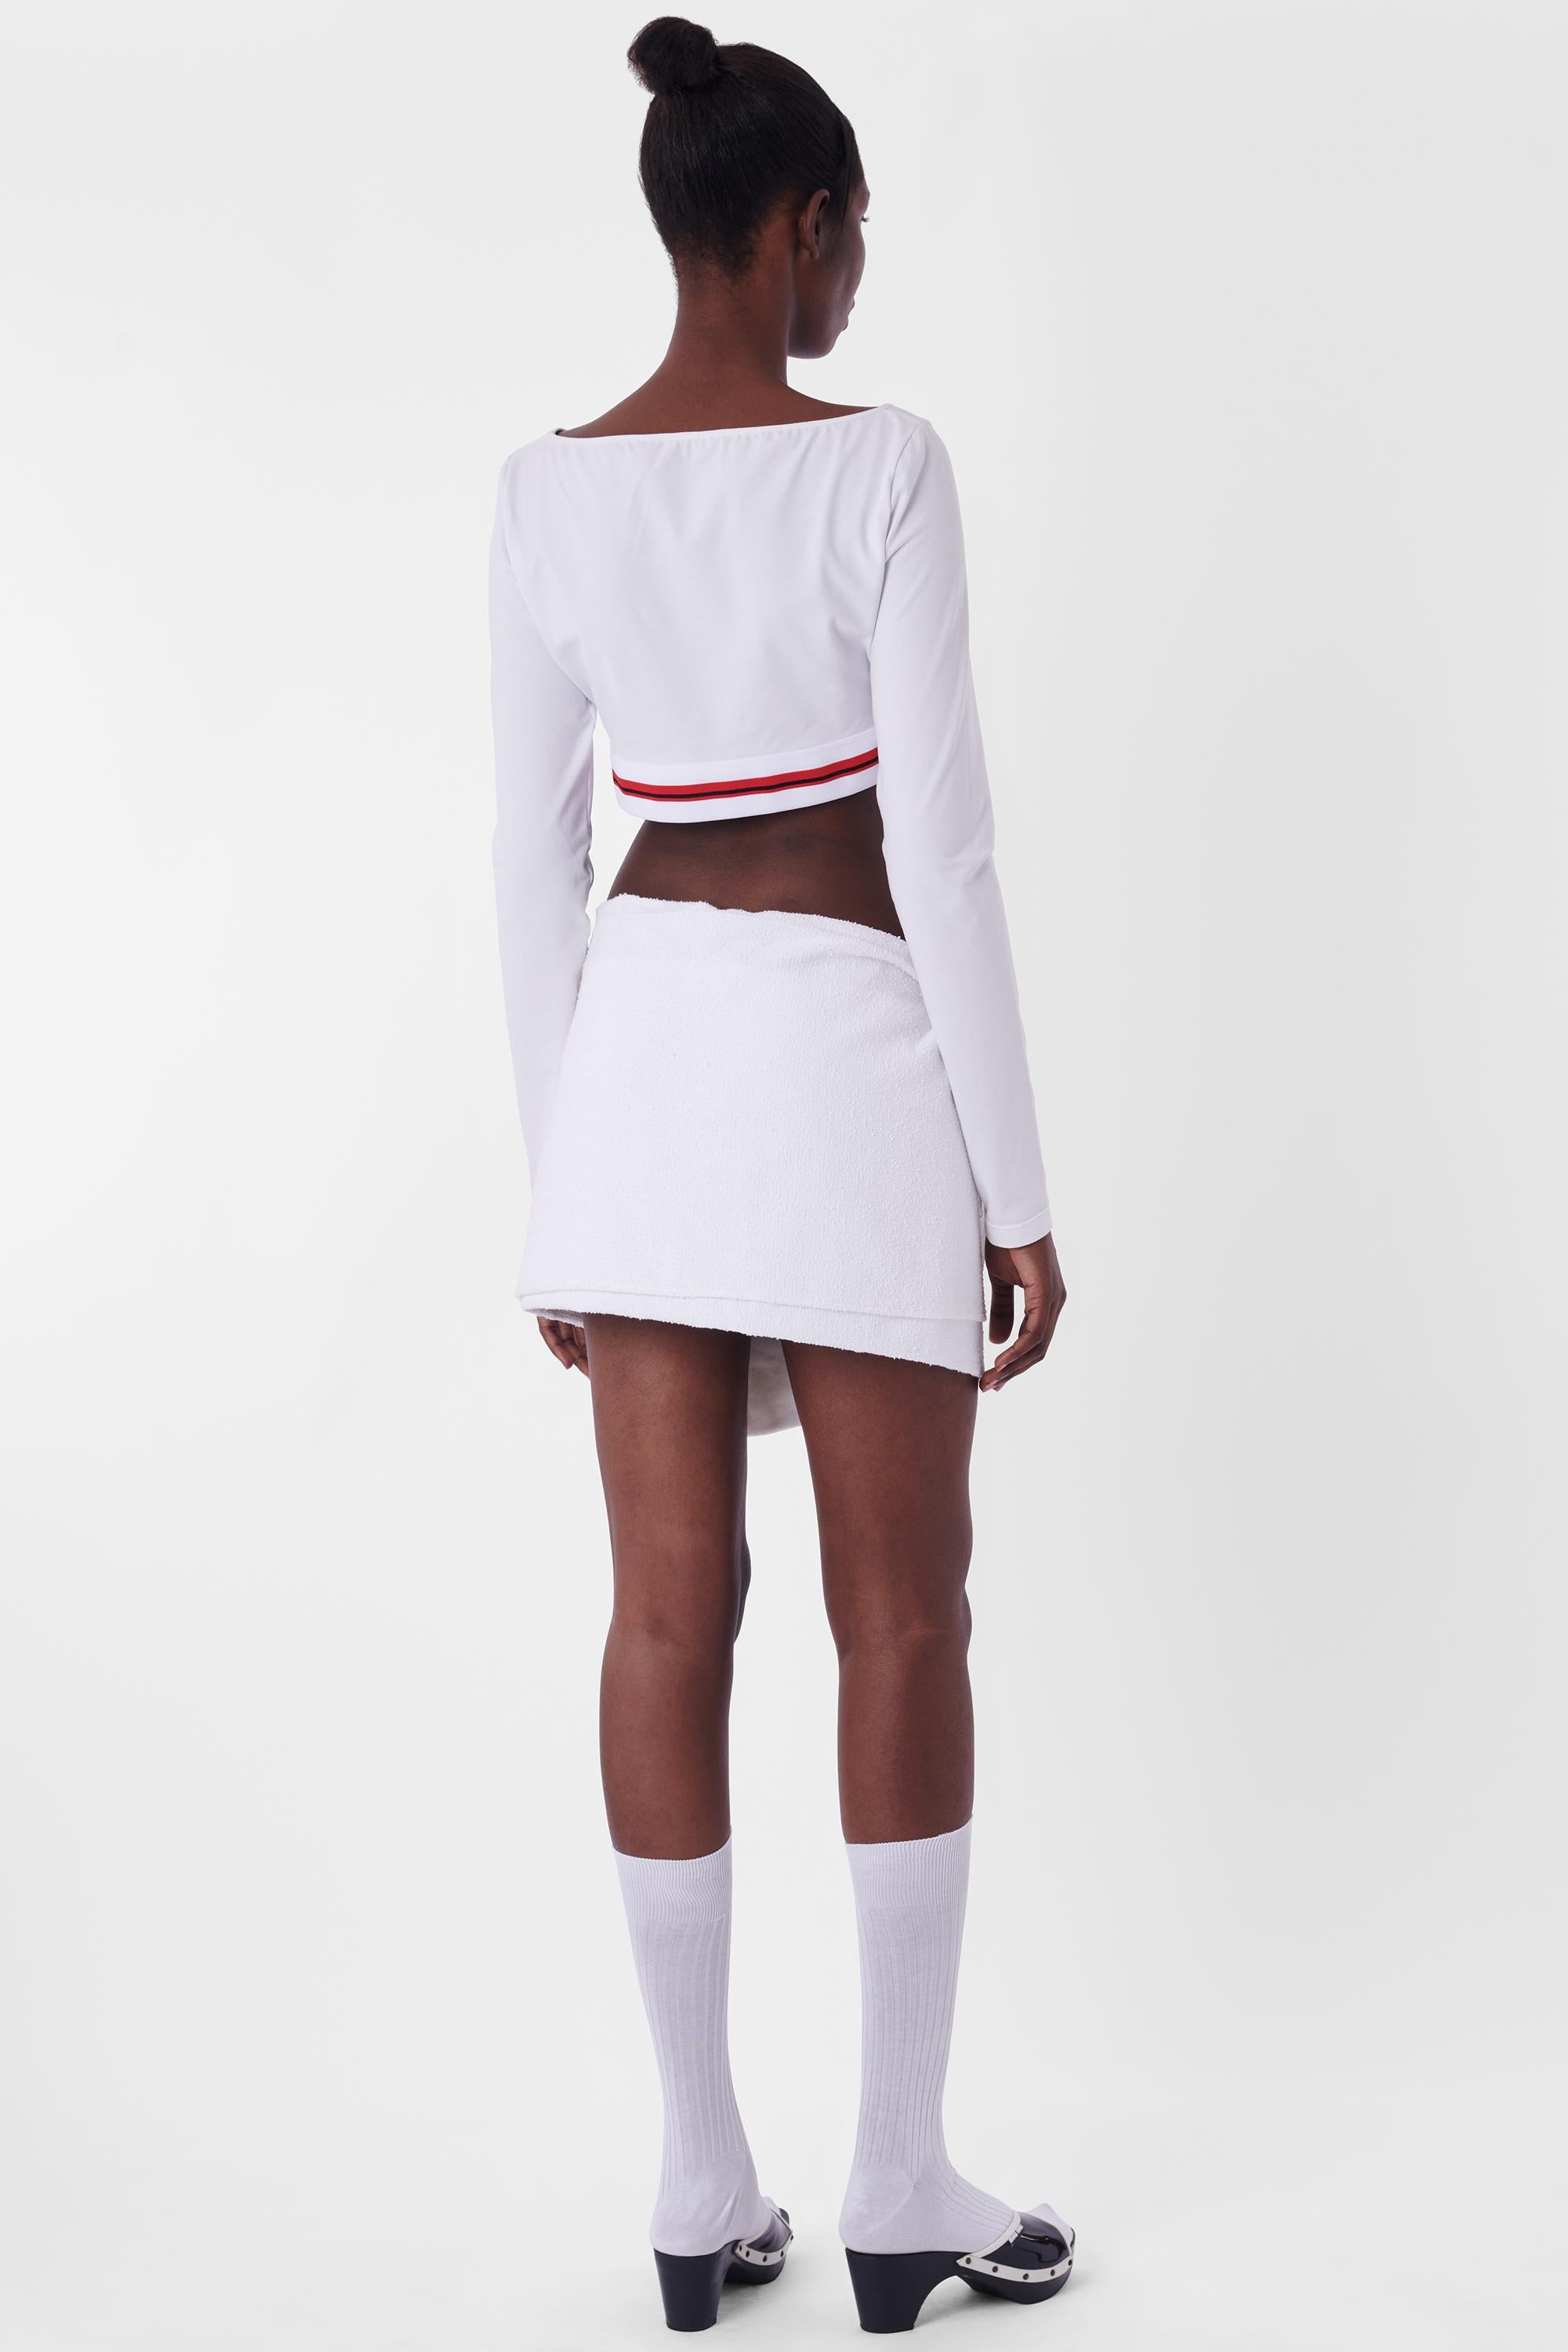 We are excited to present this Miu Miu 2021 Cropped White Top. Features long sleeves, scoop neckline and under bust white and red branded elastic band. In excellent pre loved condition with tags. Authenticity guaranteed.

Label size: Large
Modern